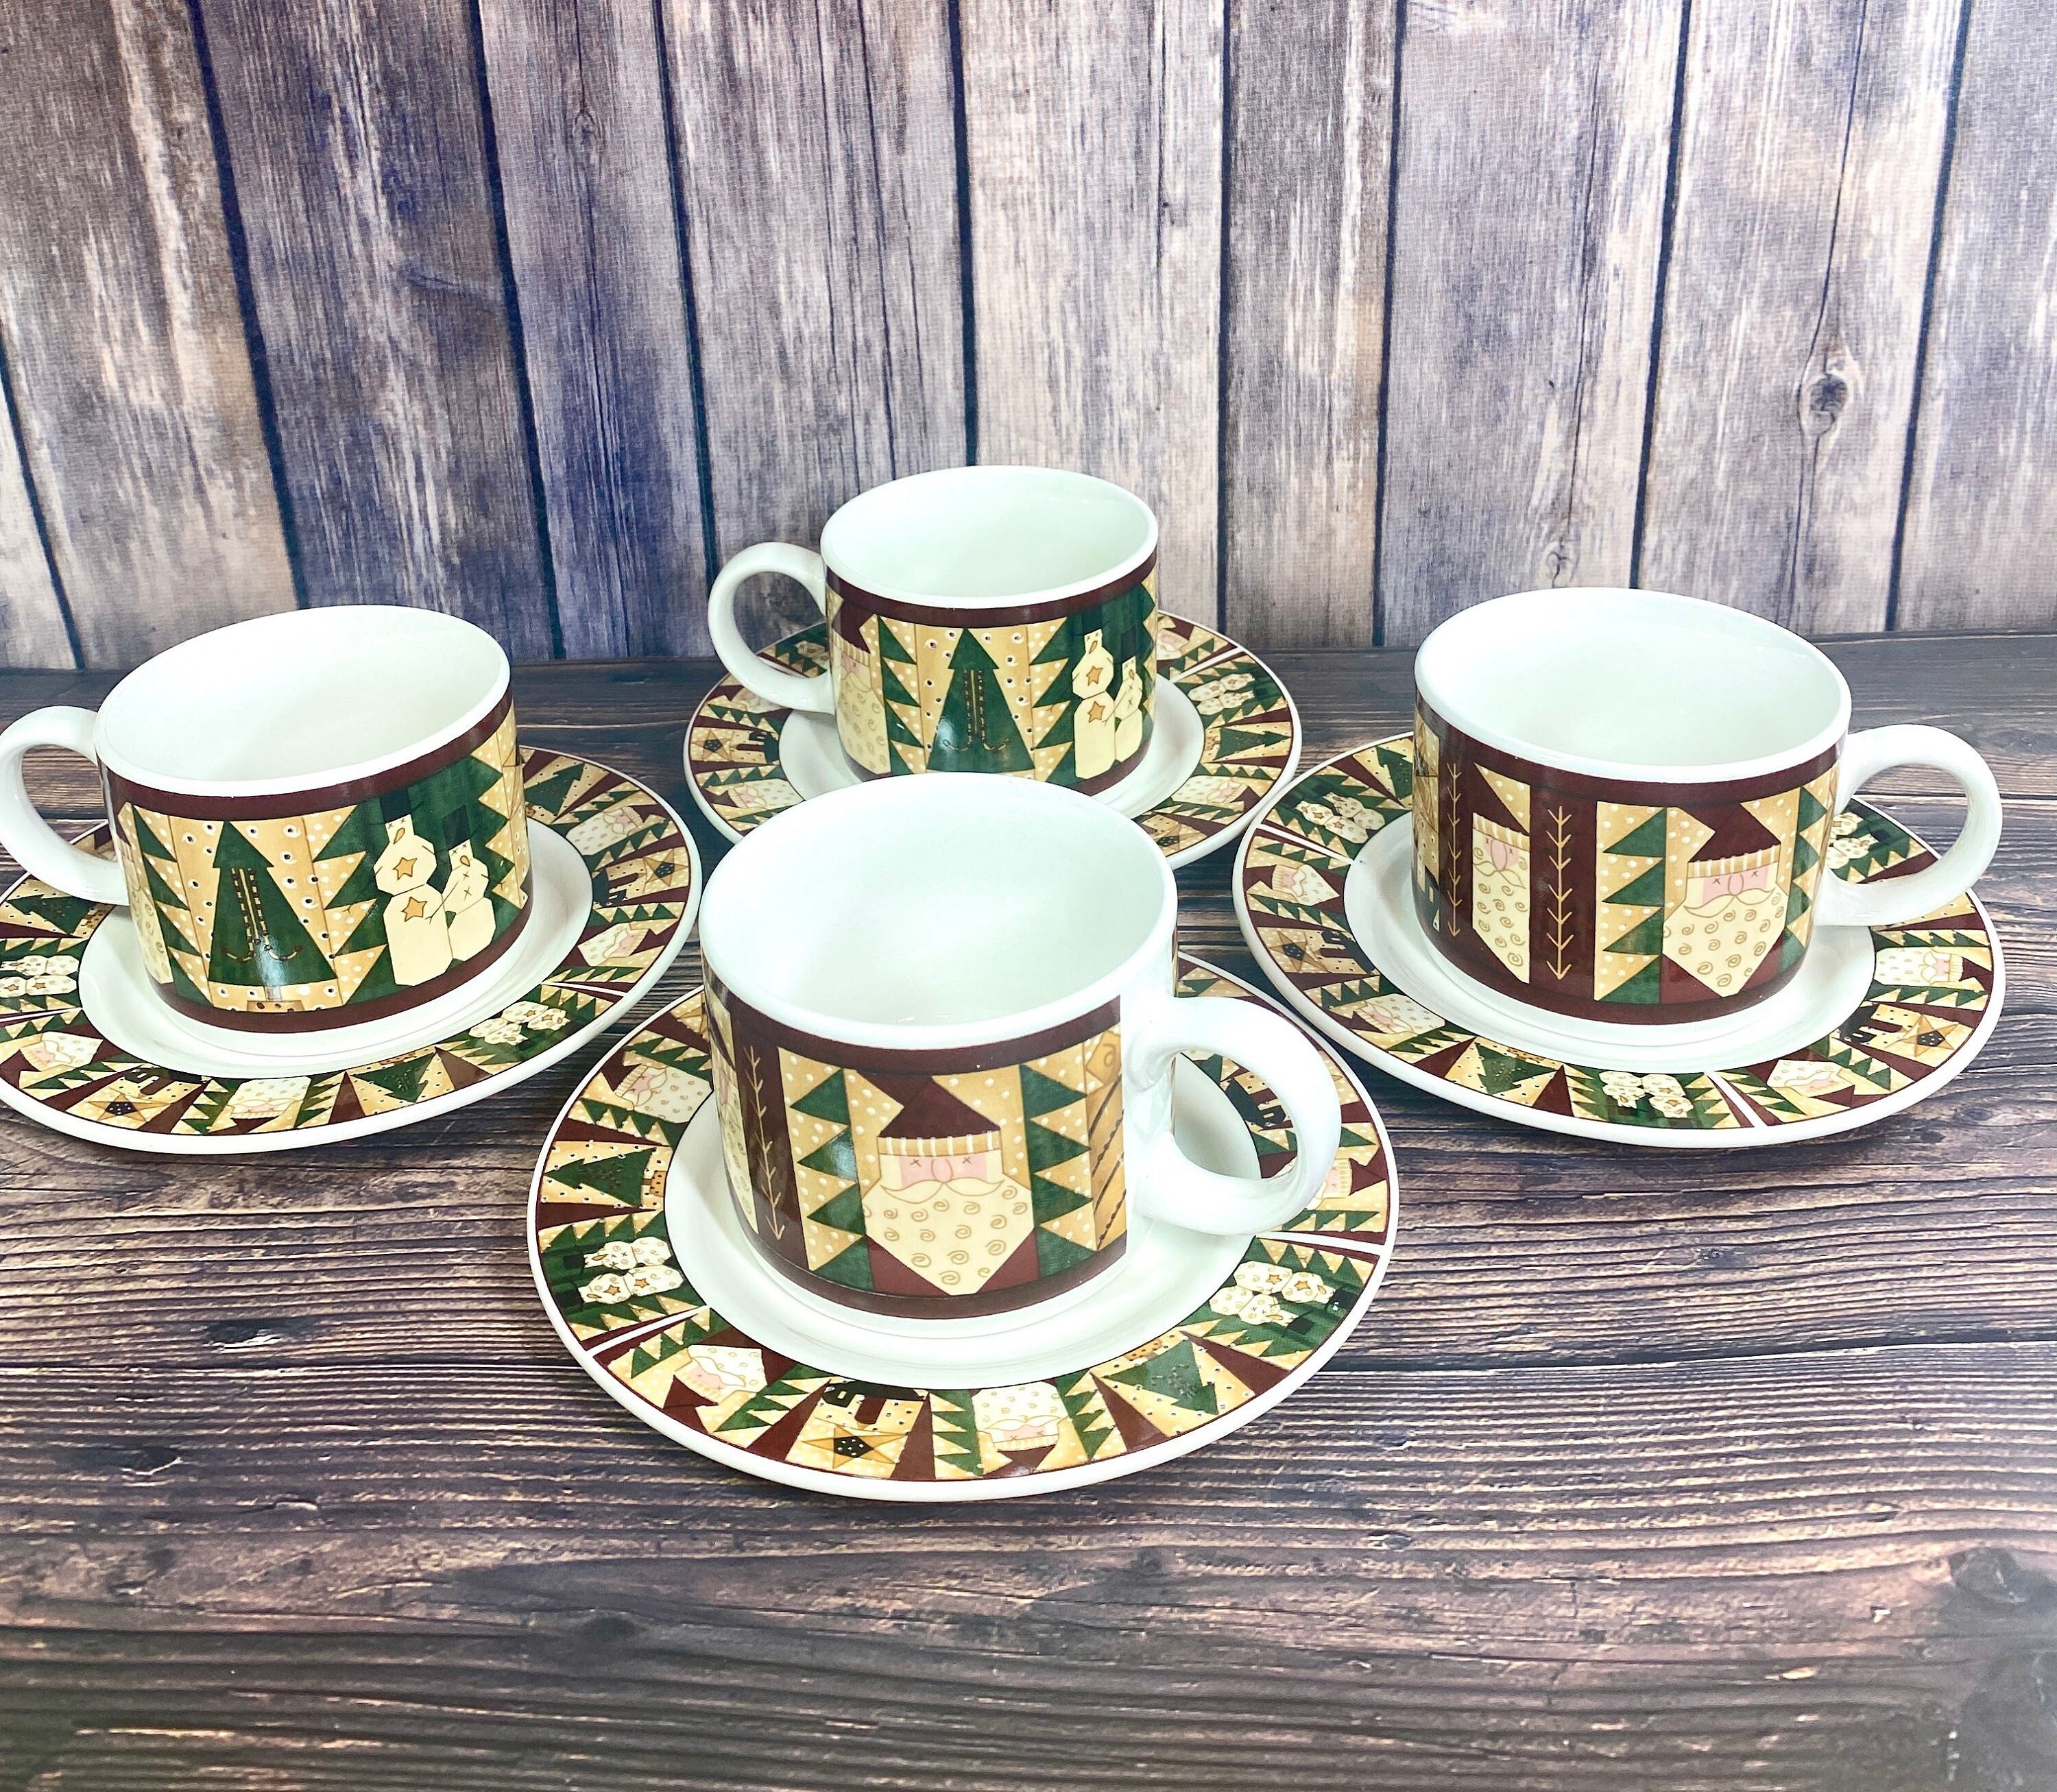 Fire espresso cup and saucer – Story of Creations